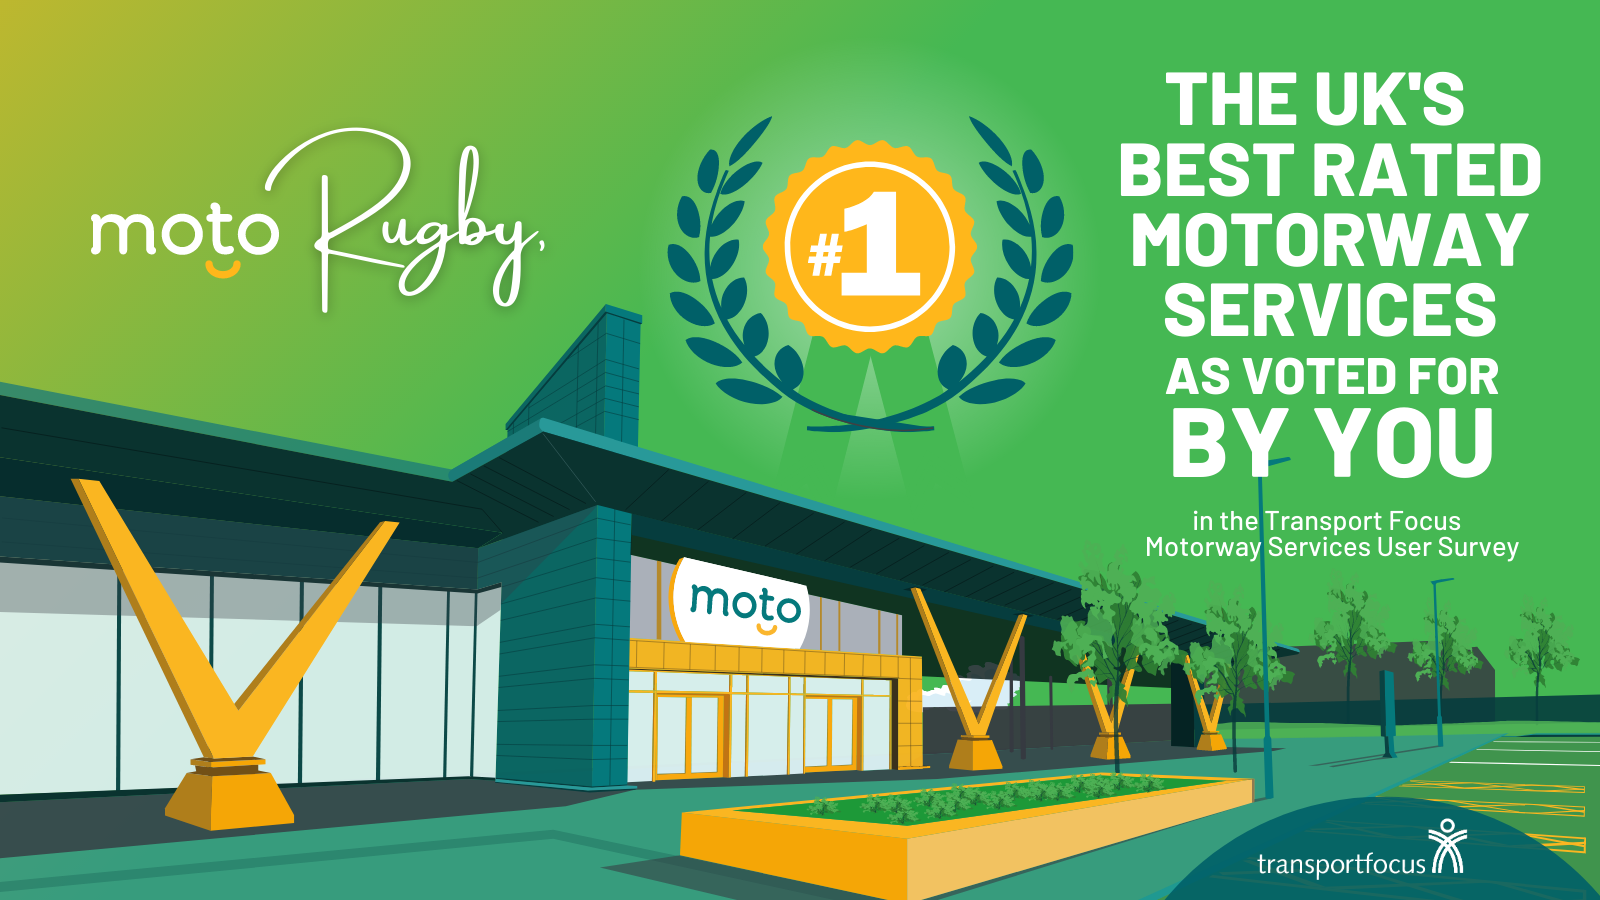 Moto Rugby rated the UK's best motorway service area by Transport Focus